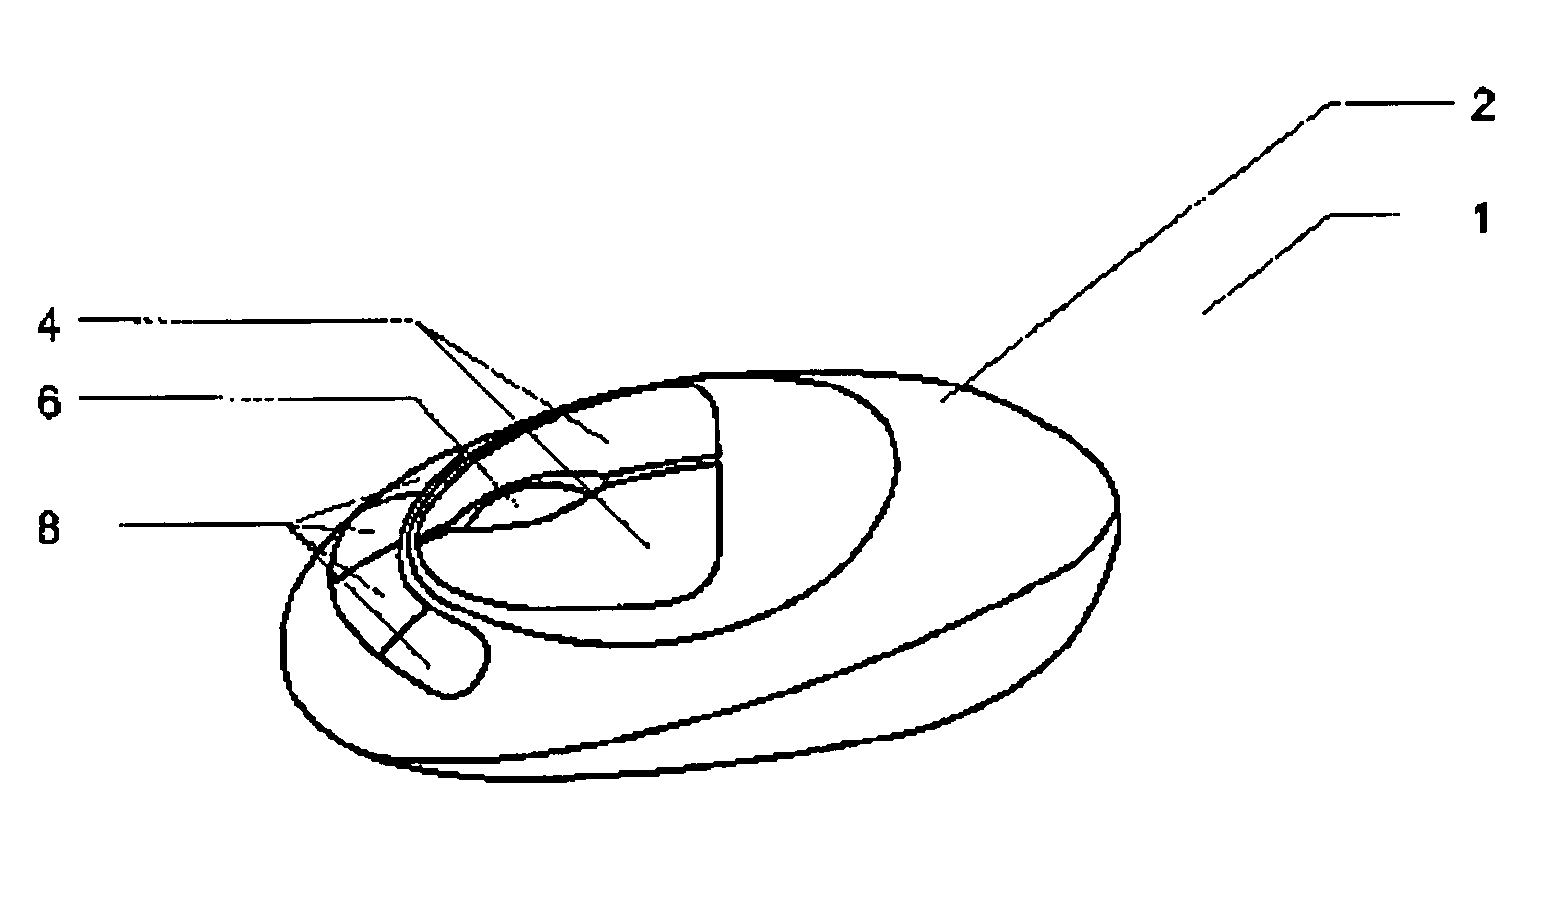 Computer mouse with data retrieval and input functionalities